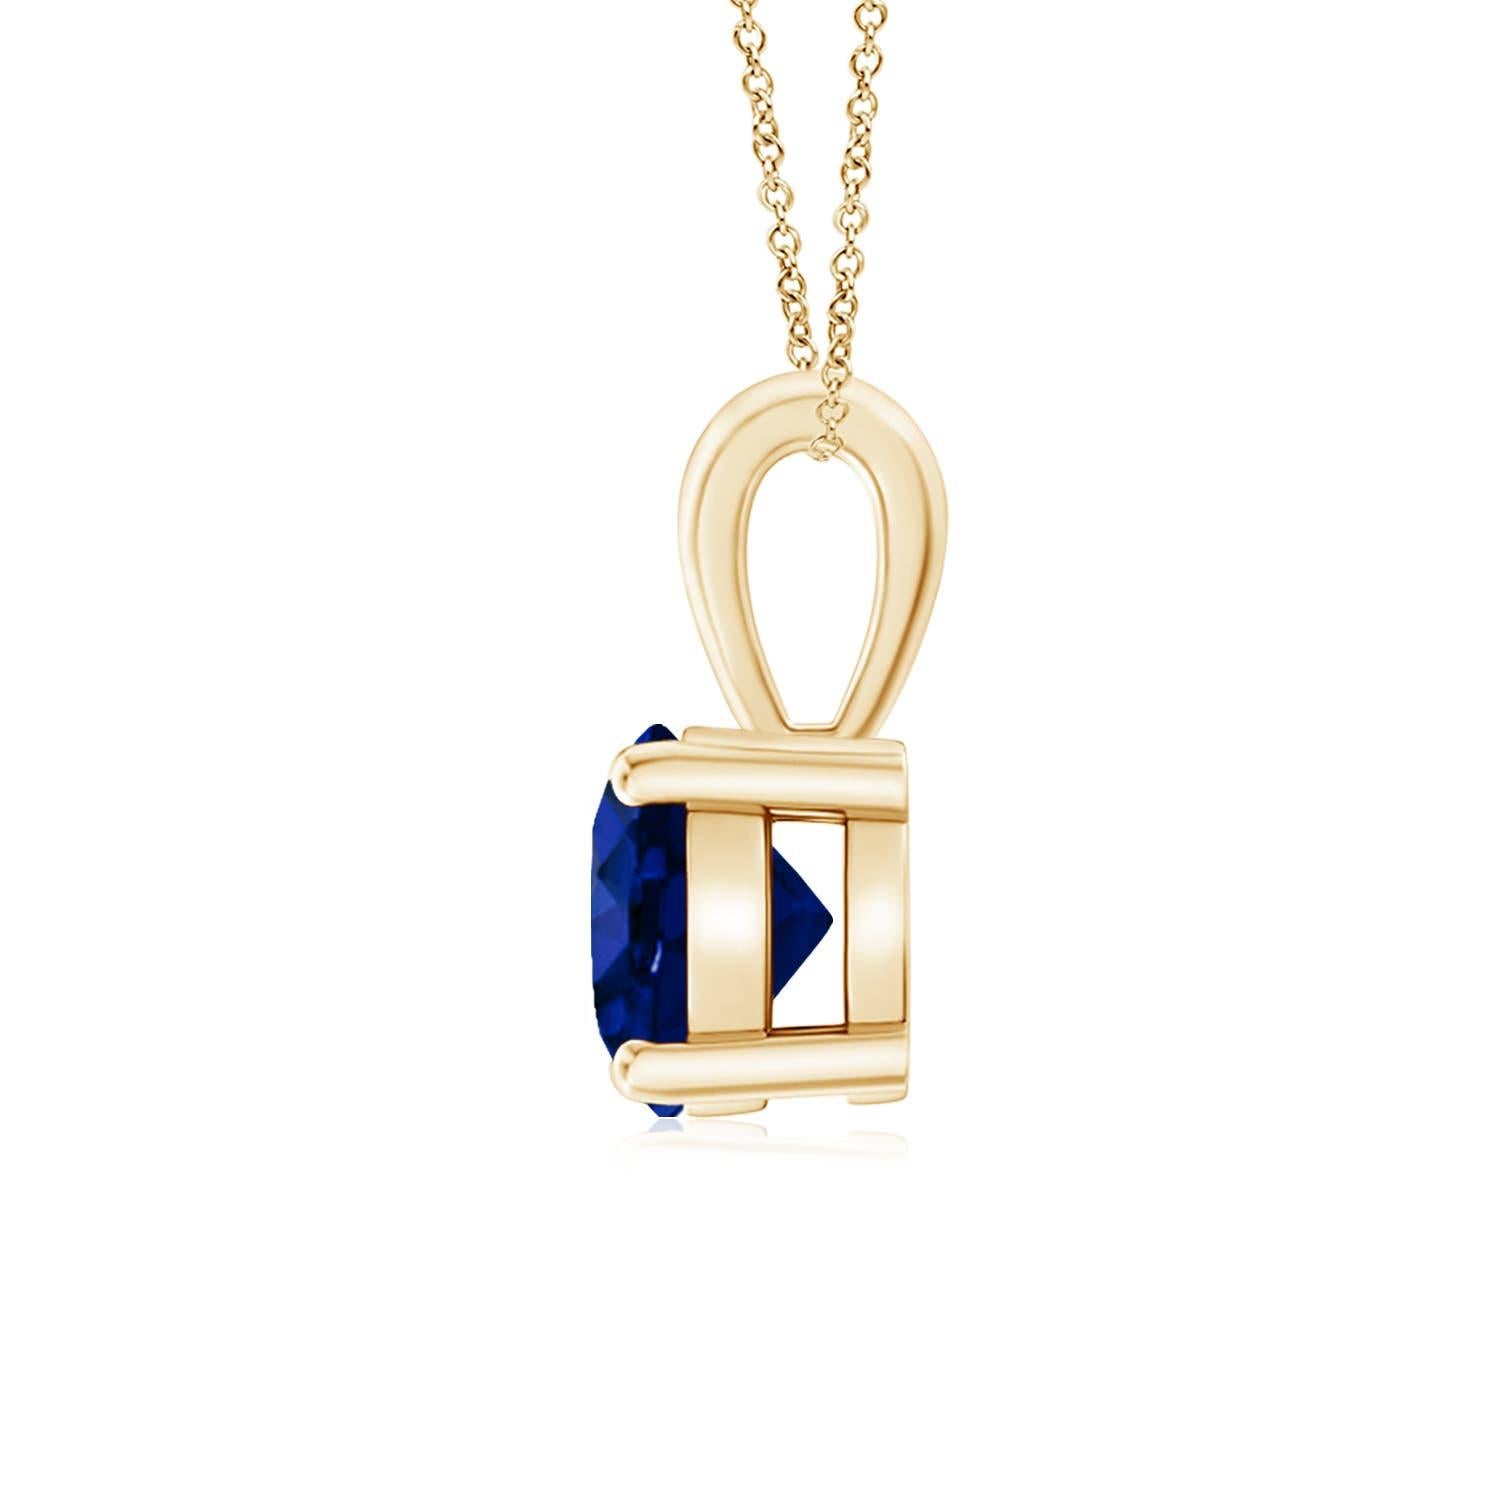 Drawing attention with its gorgeous hue and remarkable sheen is a GIA certified blue sapphire. The round sapphire is linked to a gleaming metal bale. Crafted in 14k yellow gold, this prong-set sapphire solitaire pendant is simply alluring.
